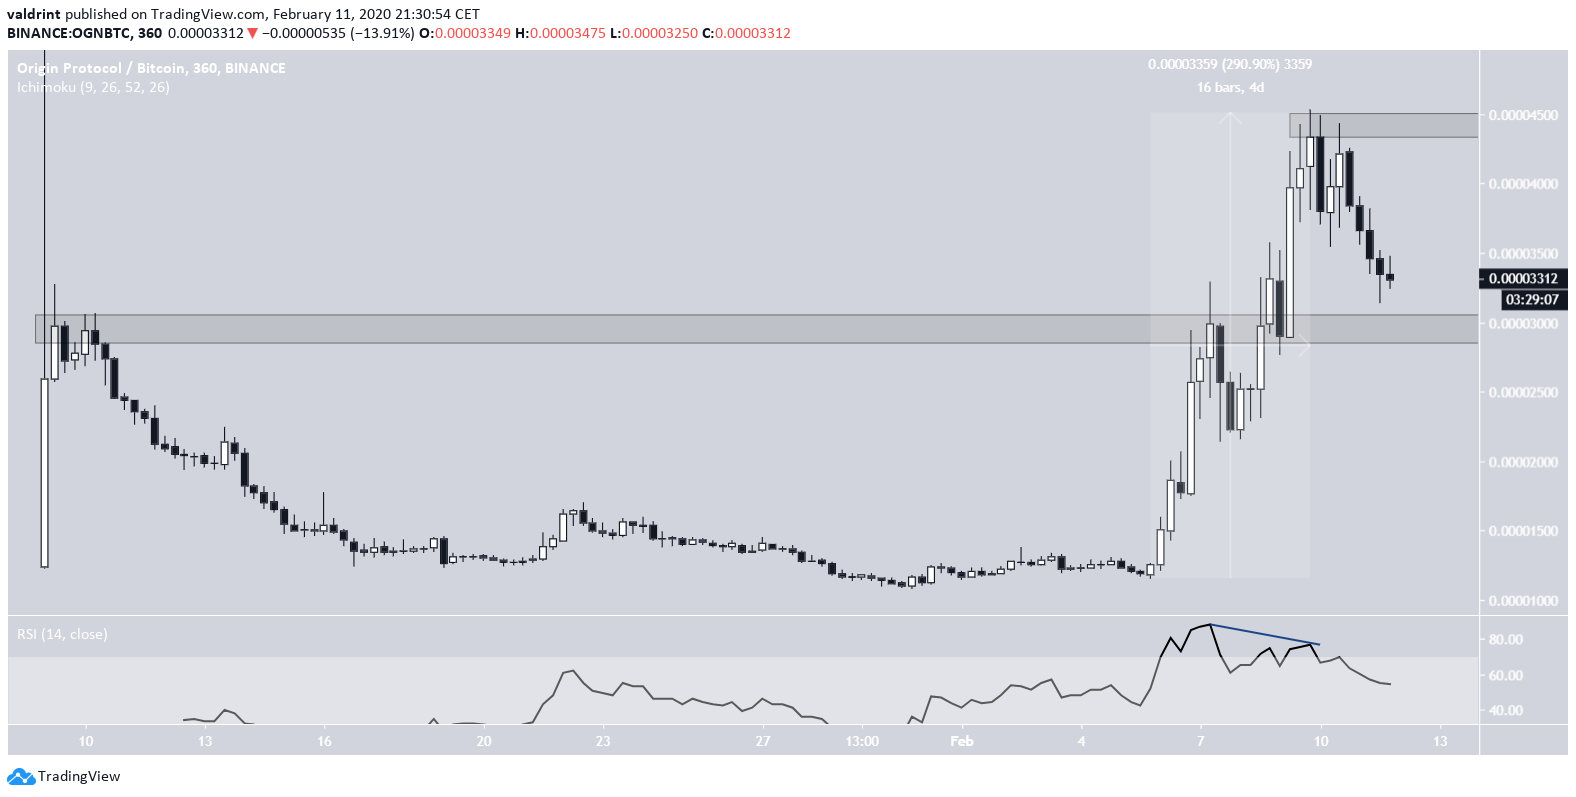 OGN Chart altcoin